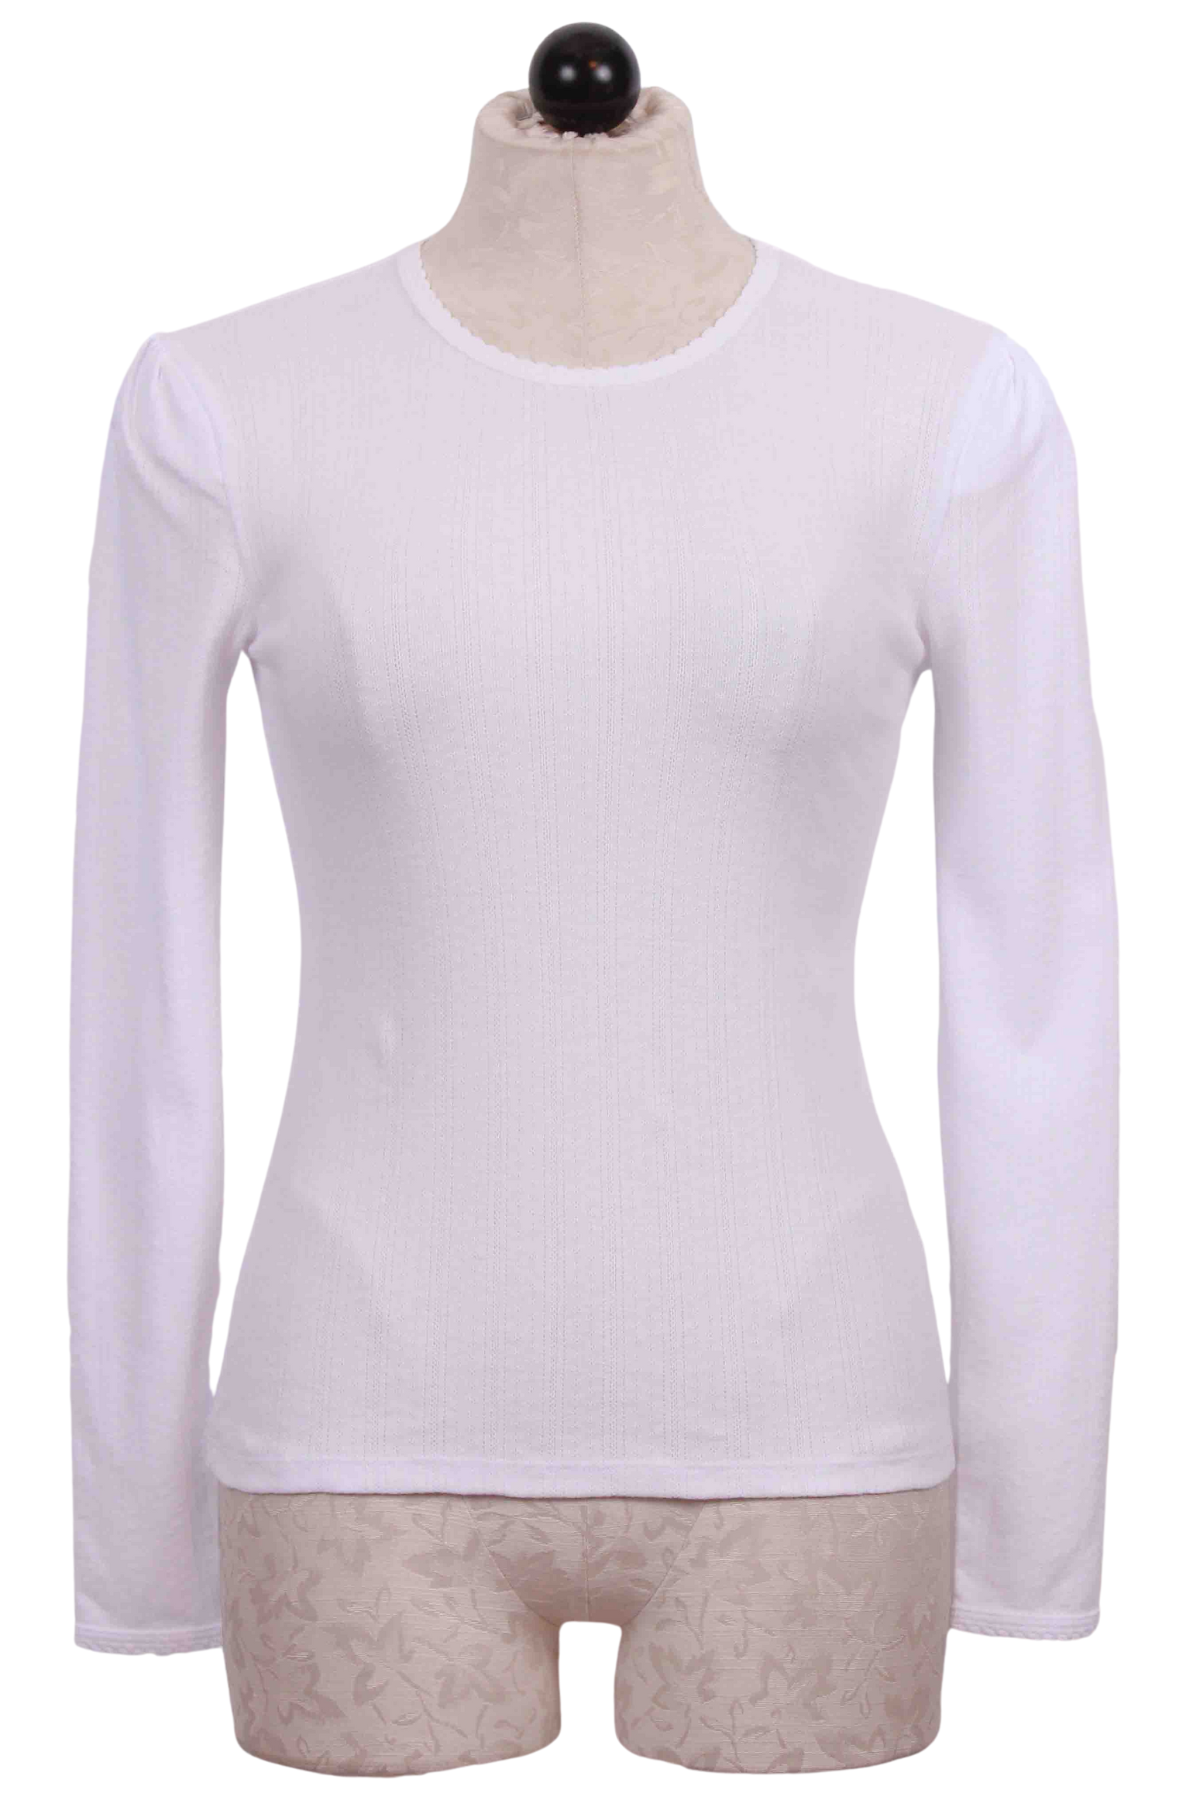 White Long Sleeve Pointelle Puff Shoulder Tee by Goldie LeWinter